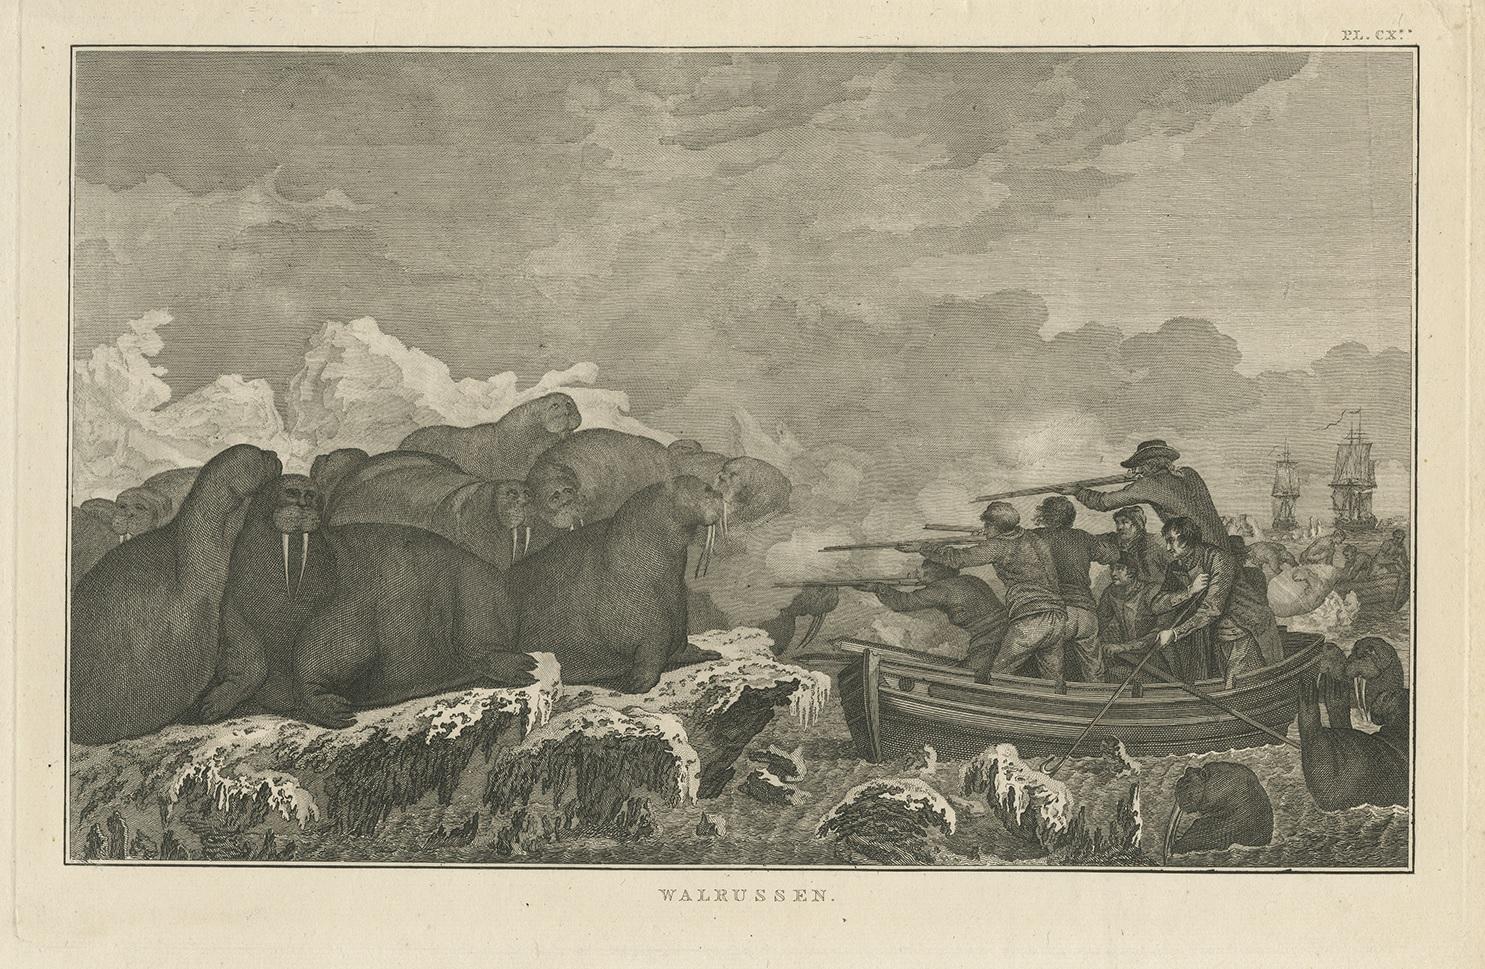 Antique print titled 'Walrussen'. This print depicts walruses, with sailors pointing their gun at them. Originates from 'Reizen rondom de Waereld' by J. Cook. Translated by J.D. Pasteur. Published by Honkoop, Allart en Van Cleef.